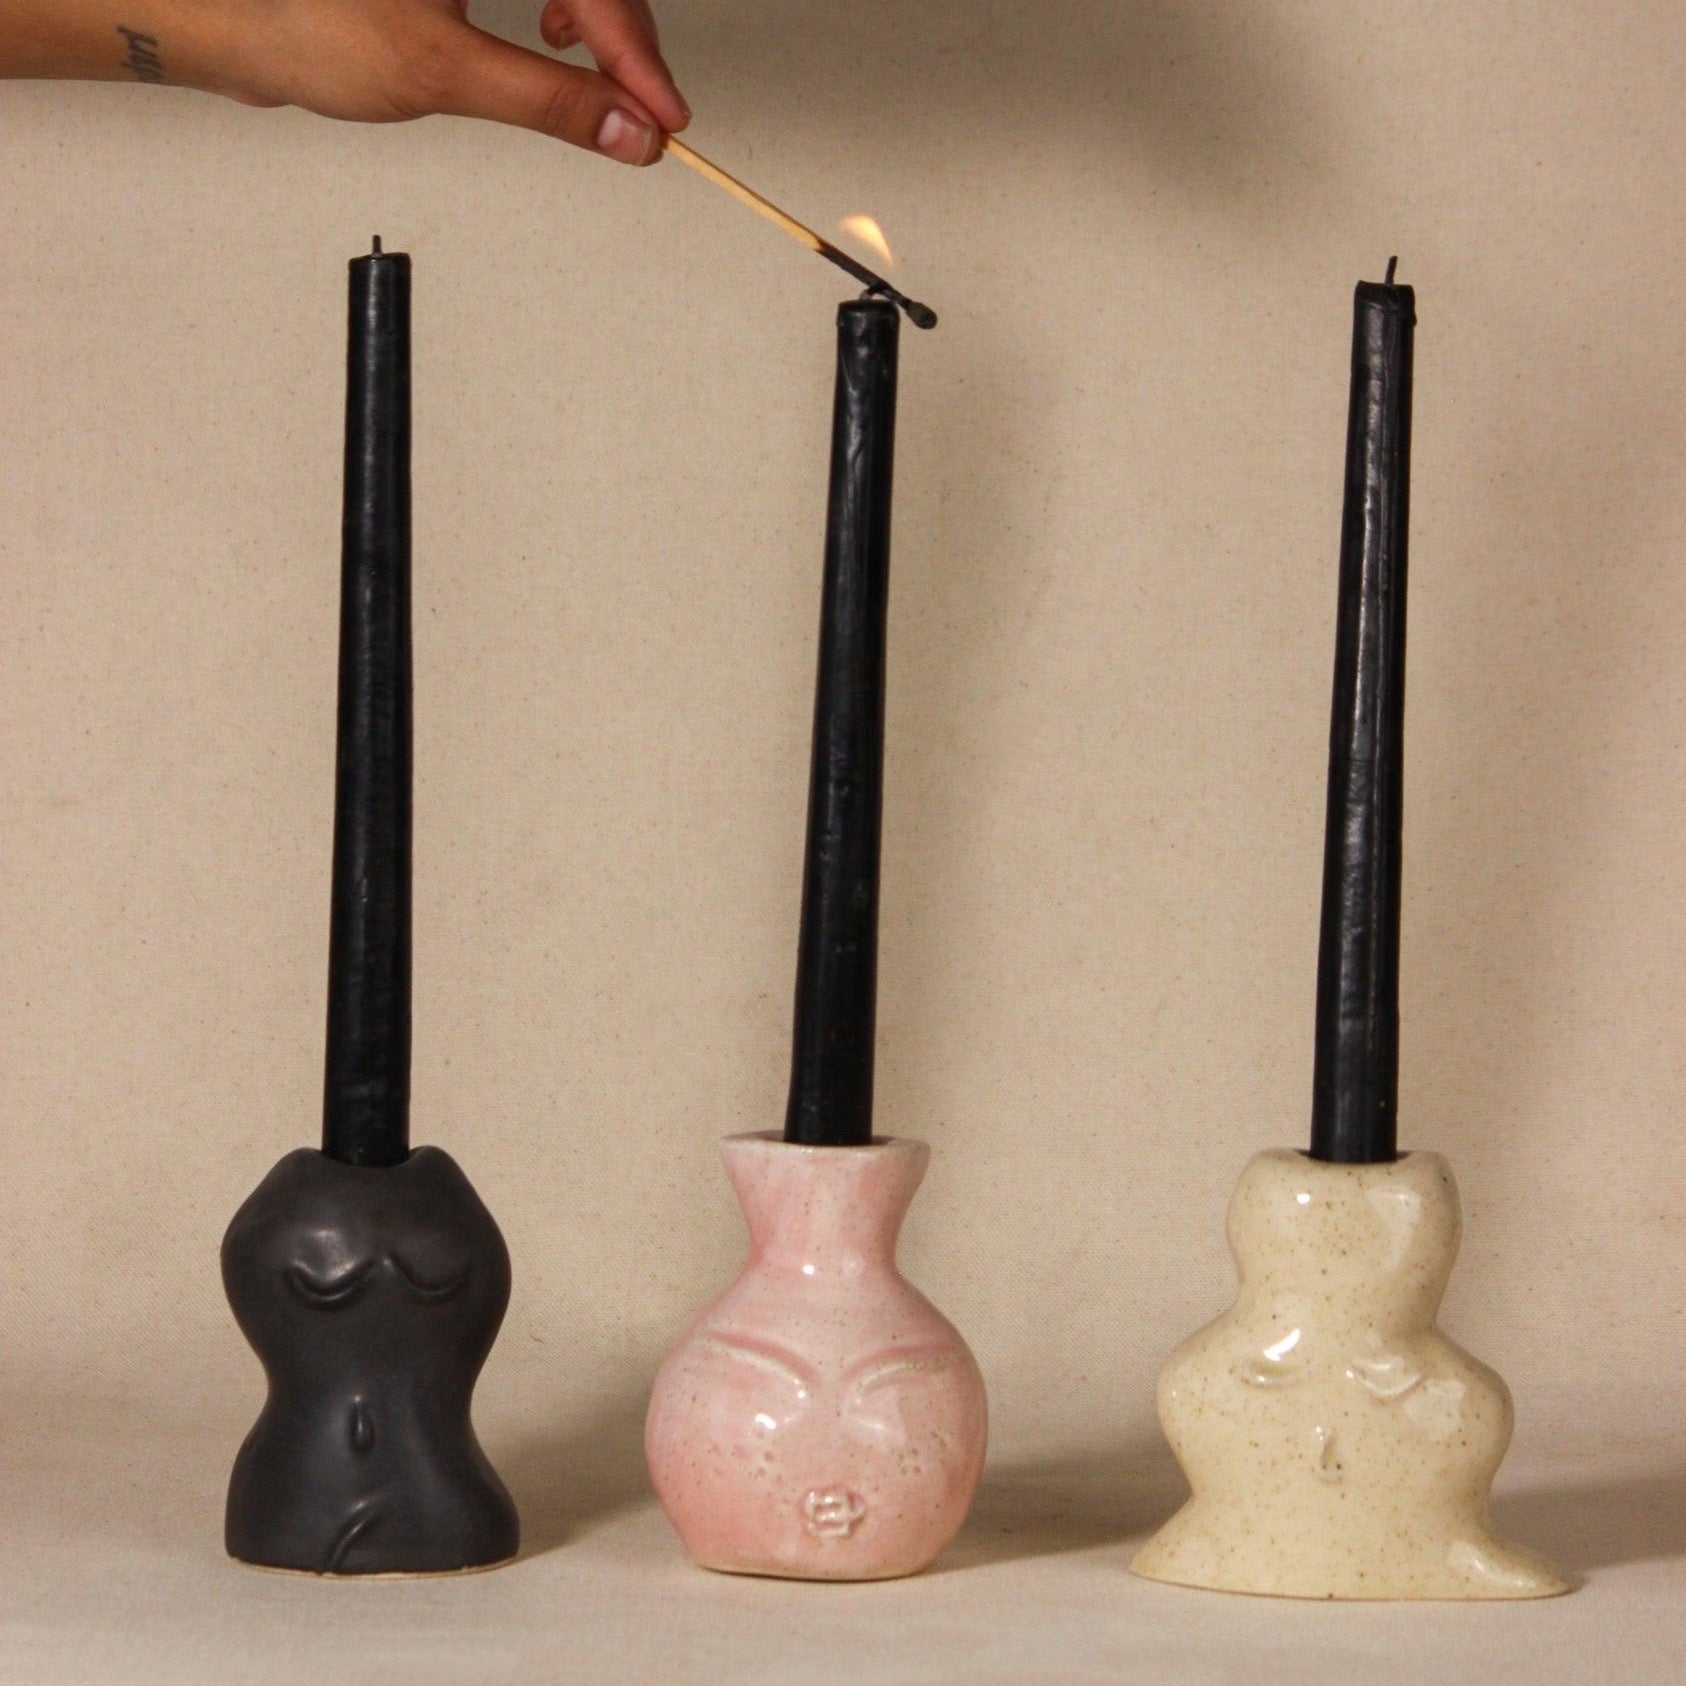 Soulful Ceramic Face Candle Holder Set of 3 - in Black , Pink , Beige colours